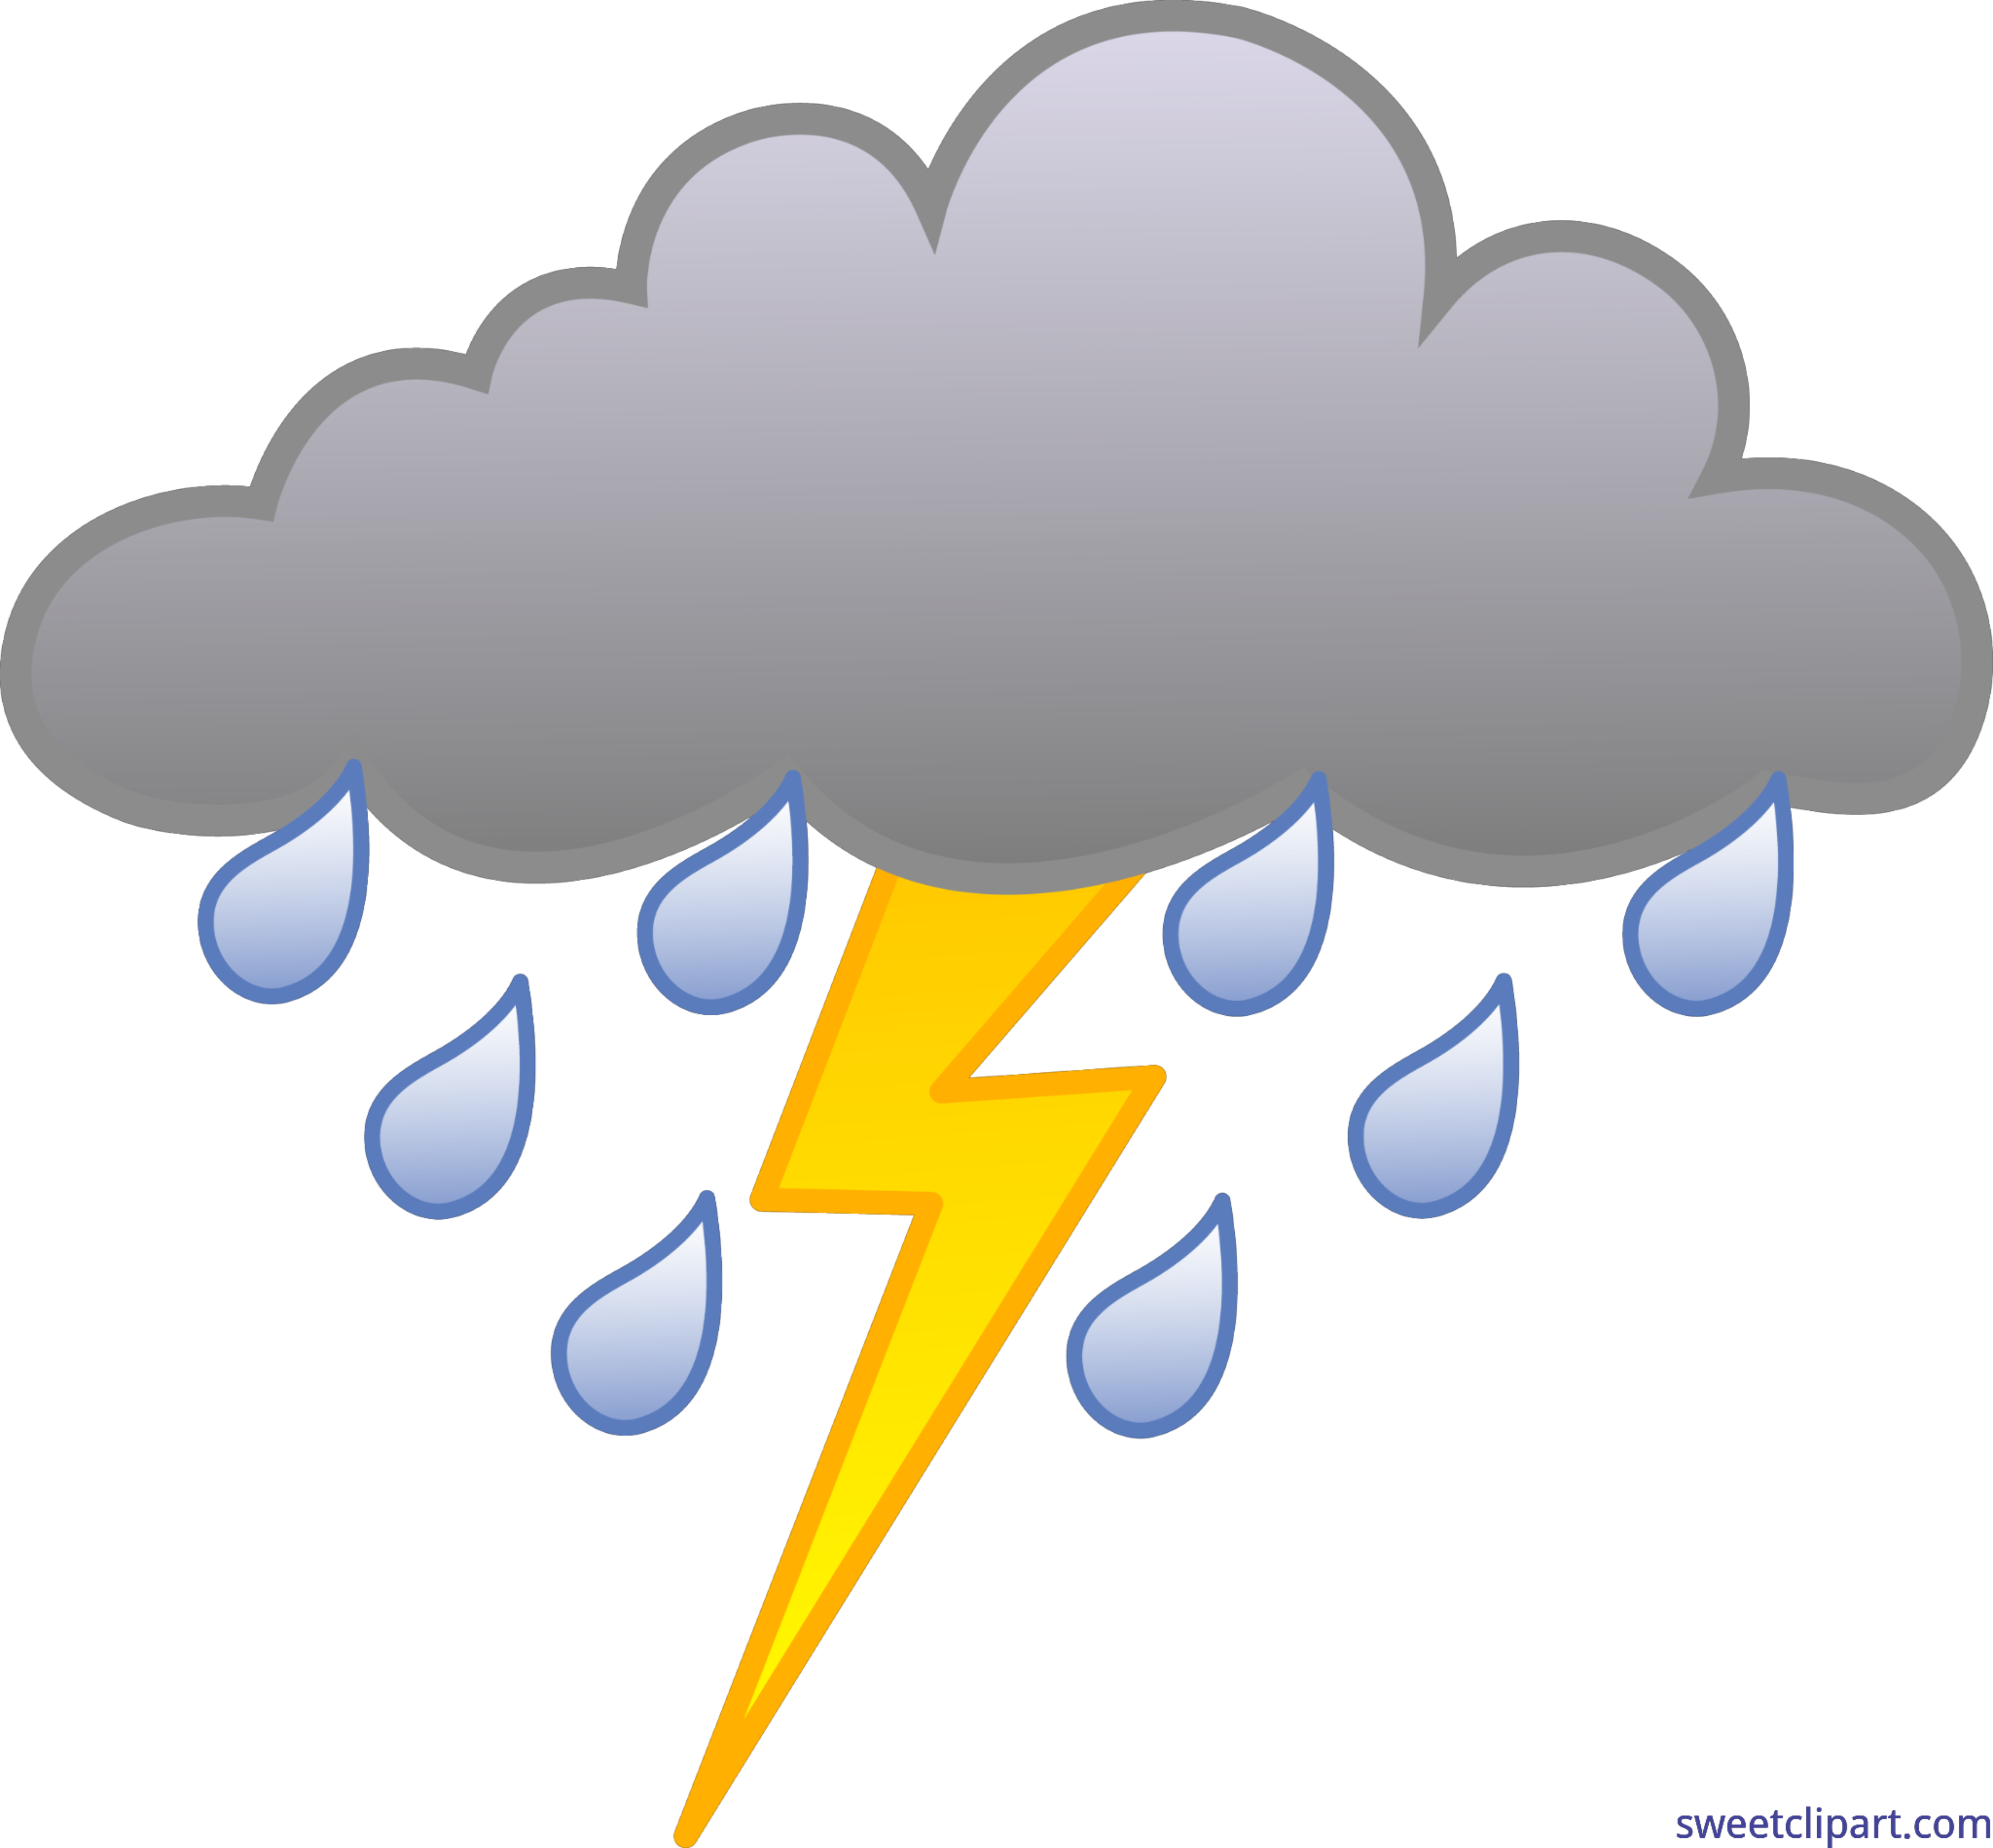 Weather with thunder clip. Wednesday clipart rainy